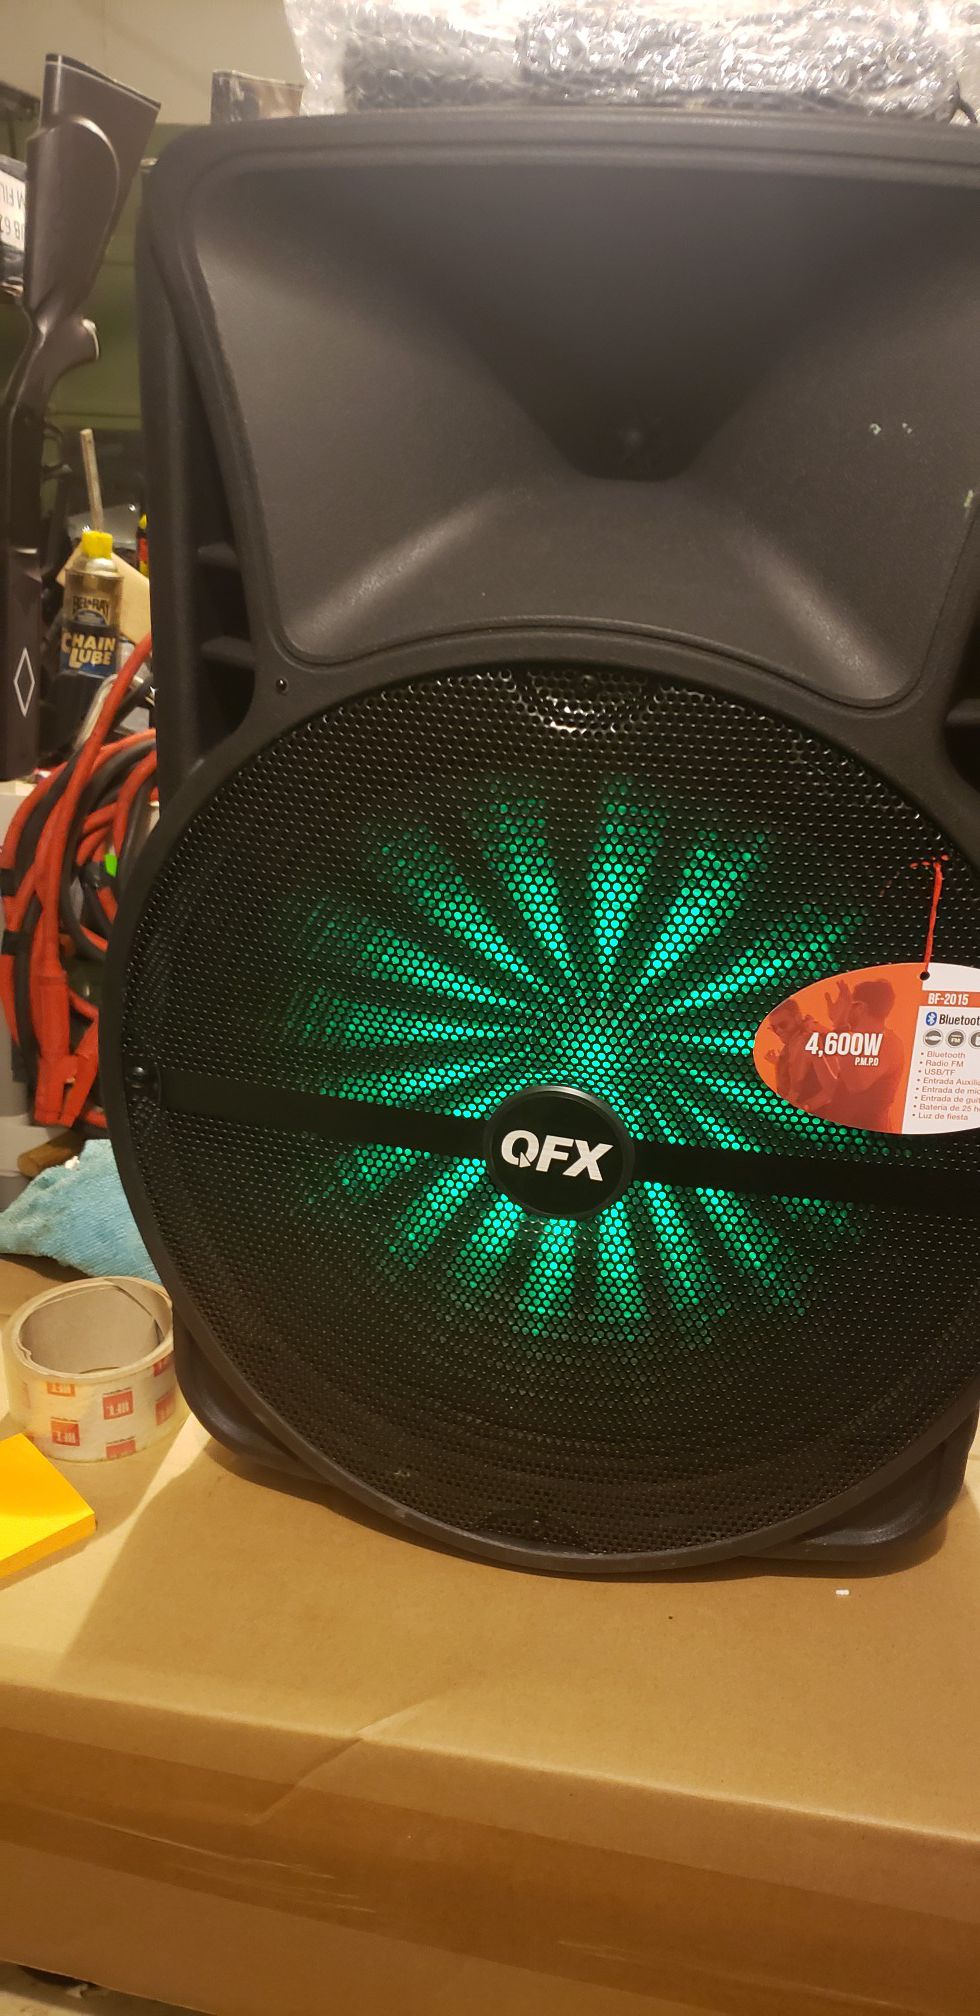 QDX BF 2018 Cordless LARGE Bluetooth wireless speaker WITH P.A, LED LIGHTS, FM RADIO, RECHARGEABLE. 15 inch subwoofer . A beast of sound system